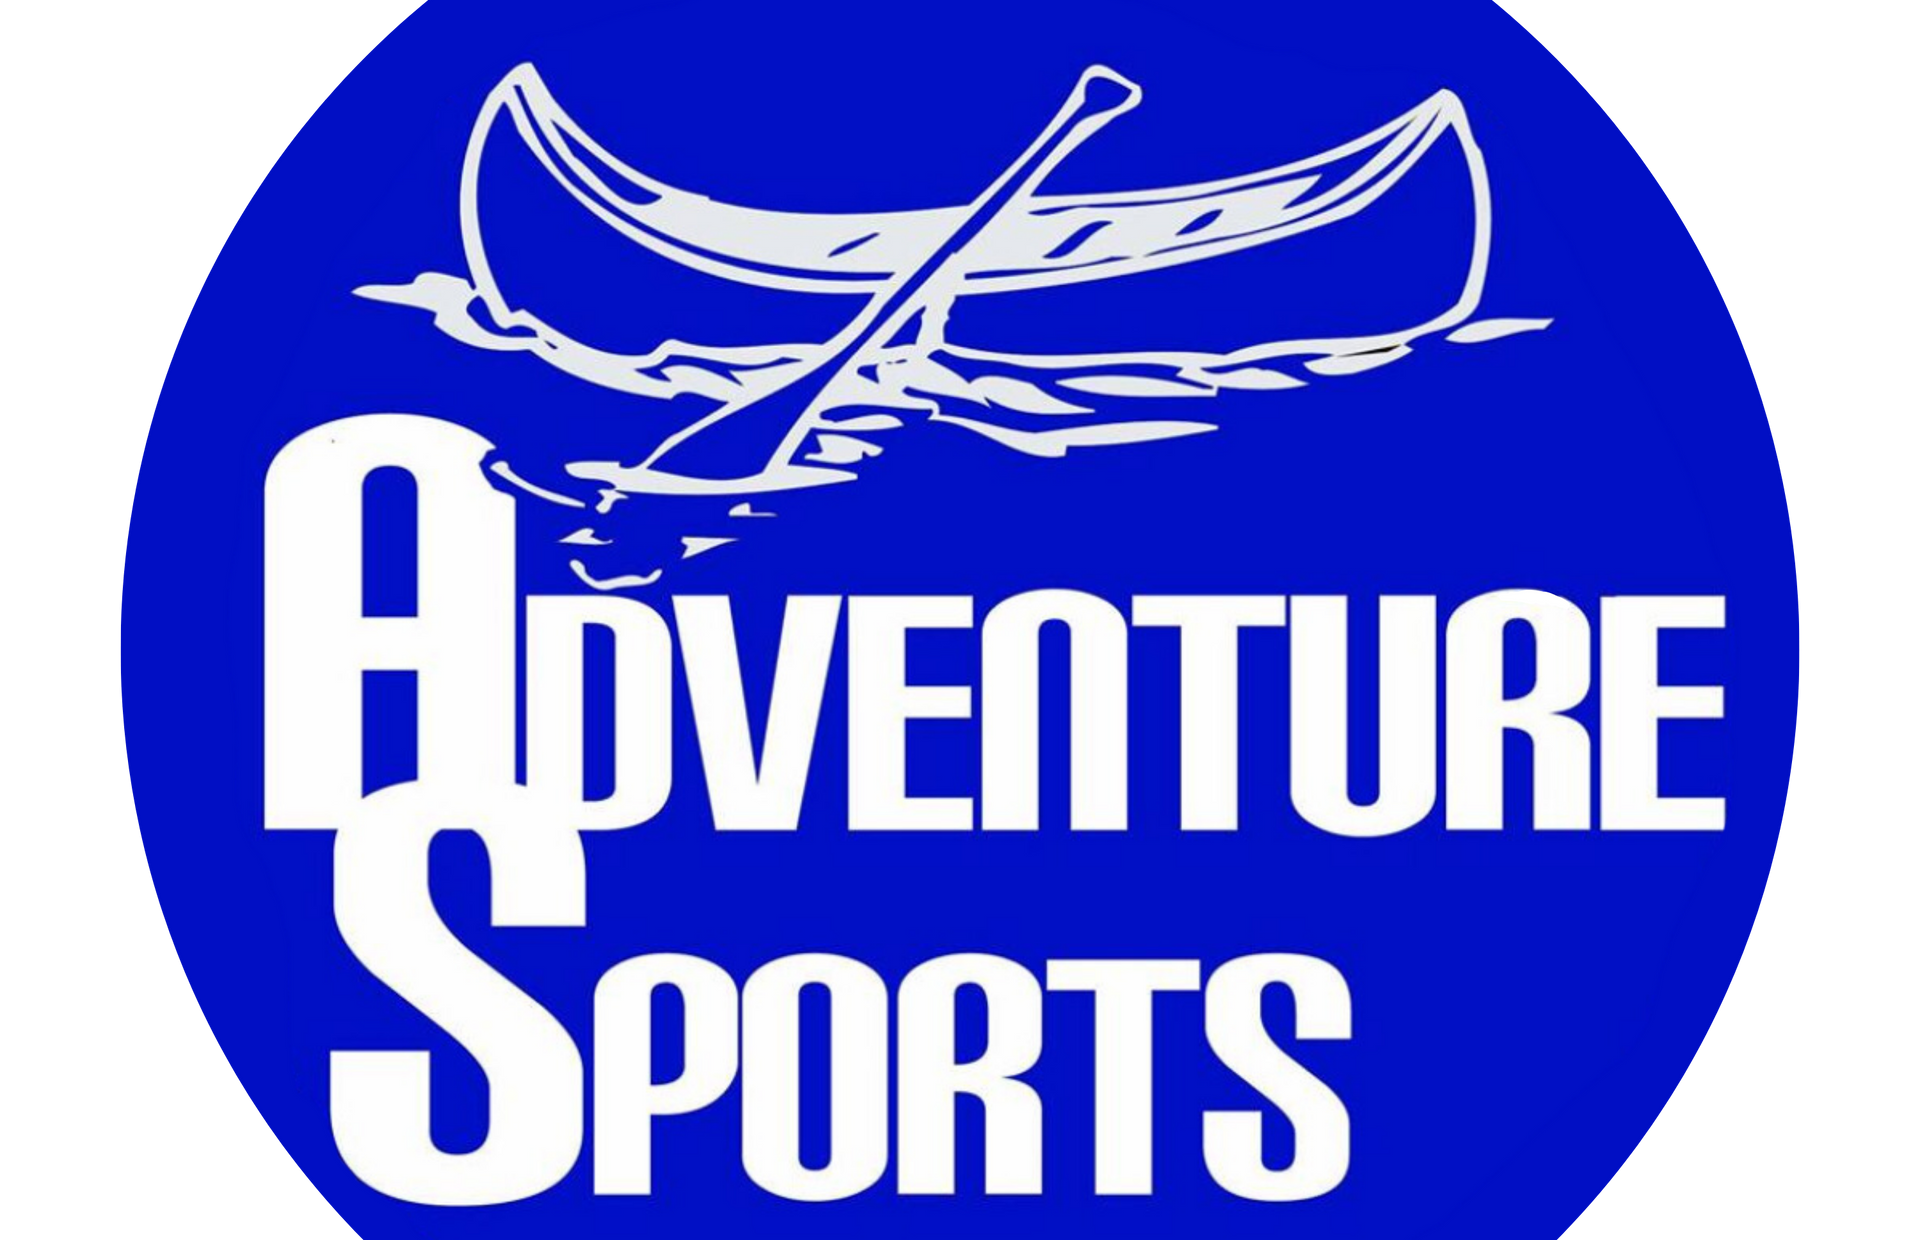 The logo for adventure sports shows a canoe in the water